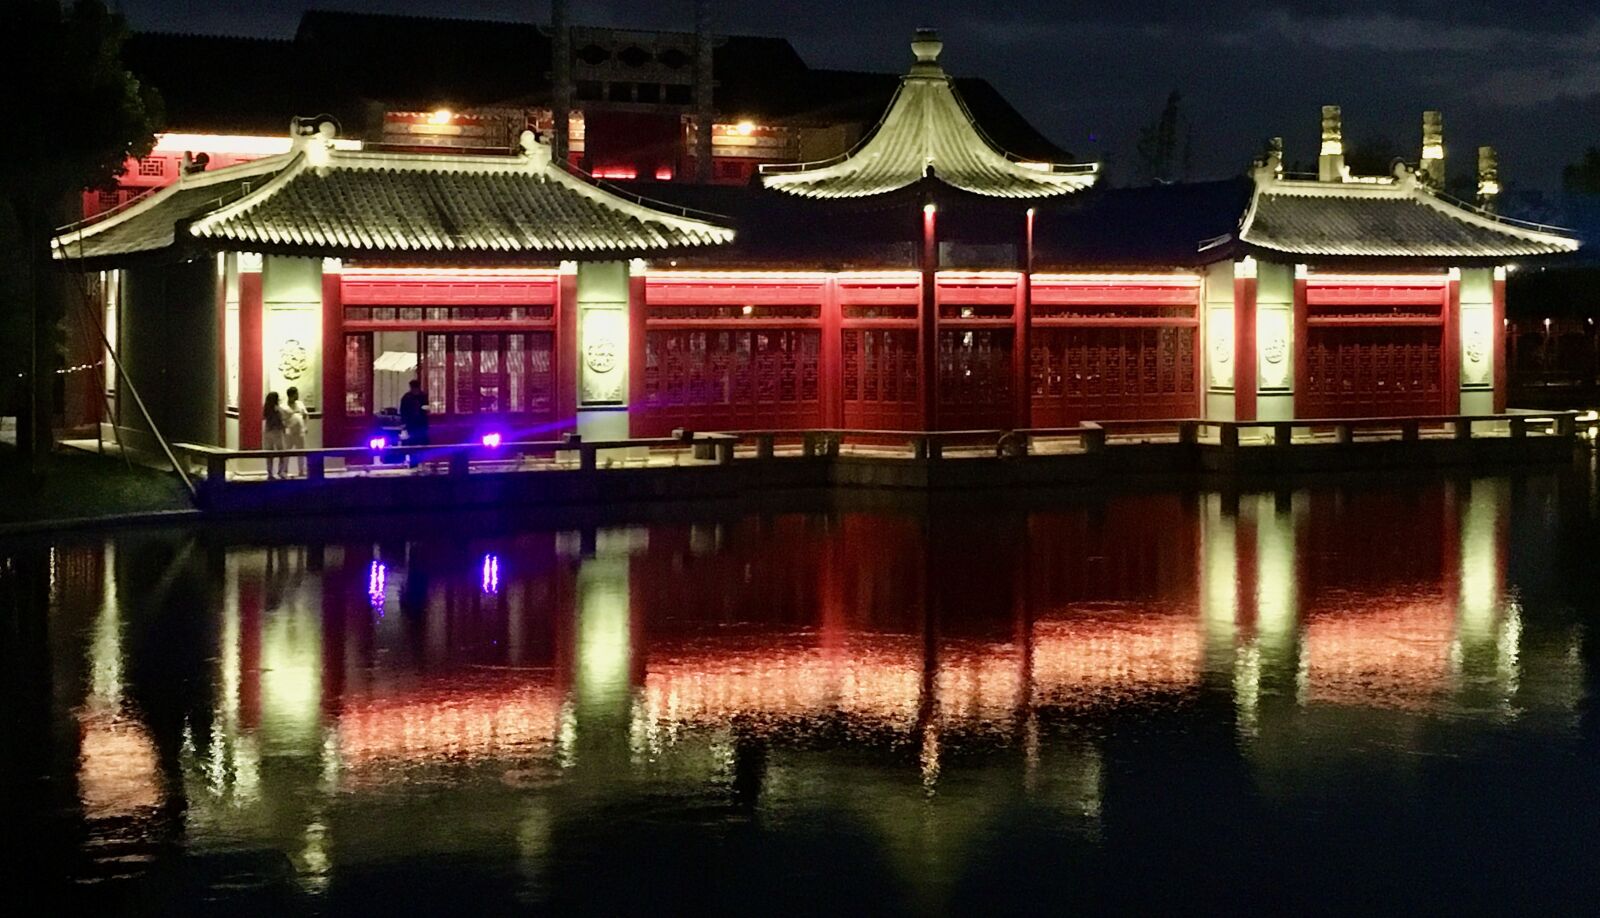 Apple iPhone 6s sample photo. Temple, china, night photography